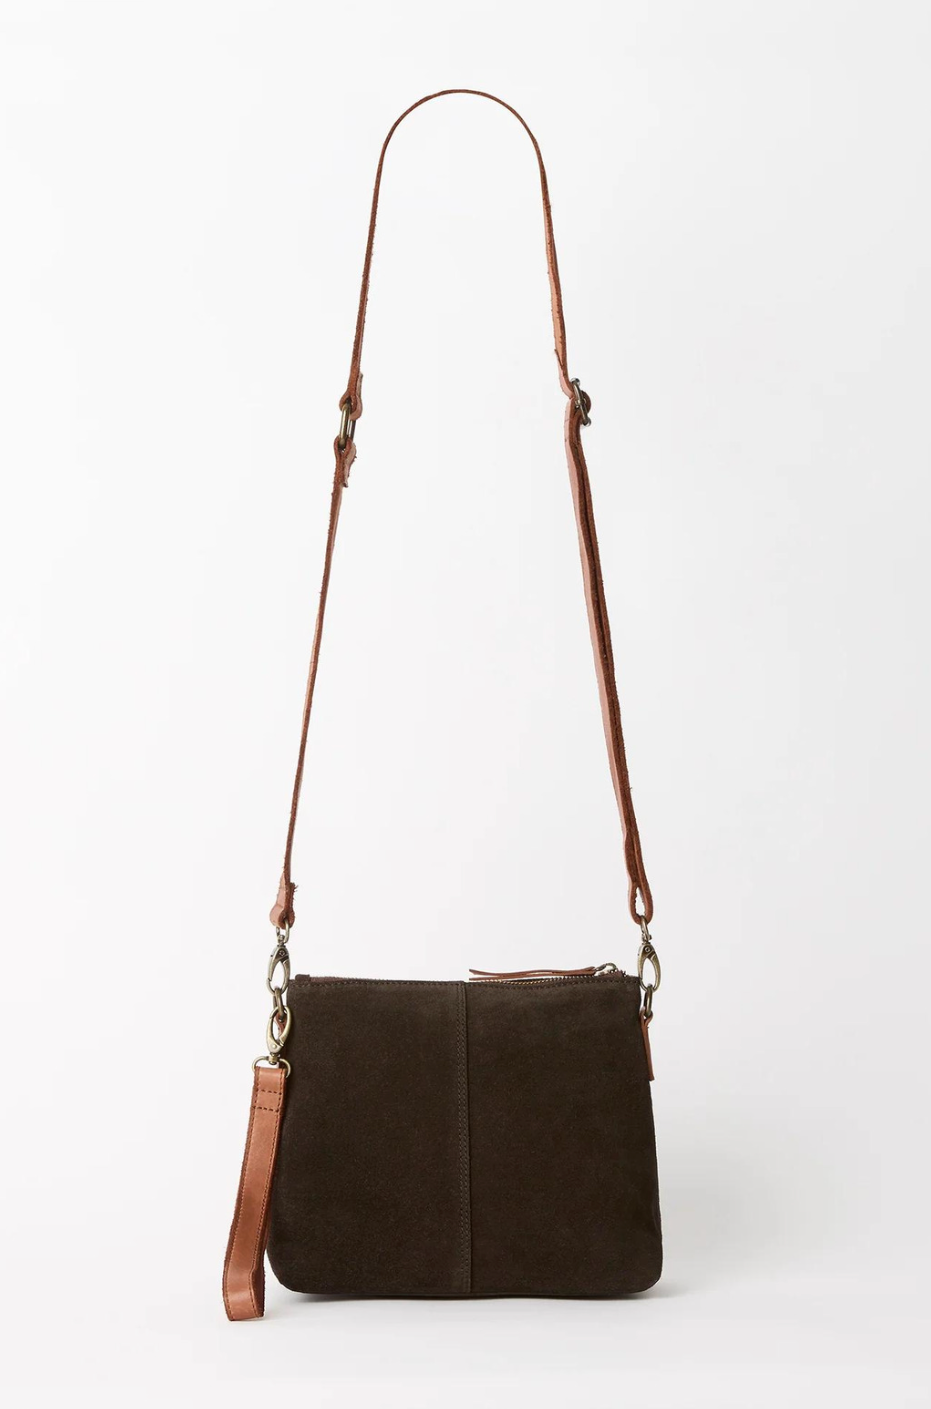 JUJU & Co Suede Essential Leather Pouch in Chocolate